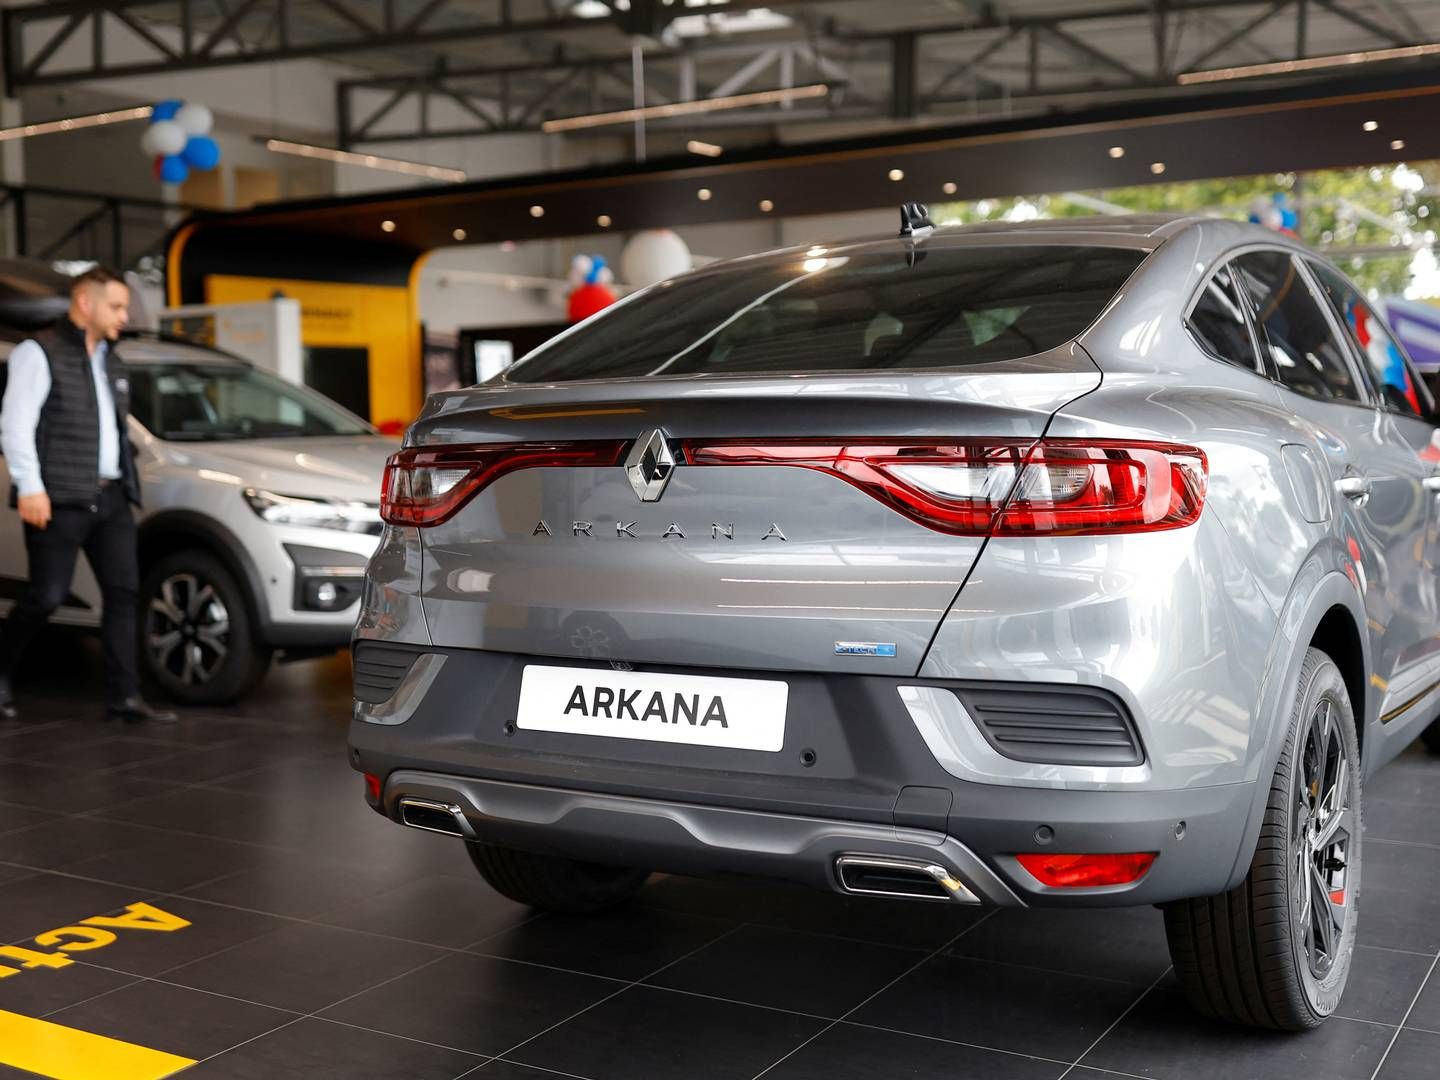 There is room for three cars of the Arkana model in a tall 40-foot container, says Renault.